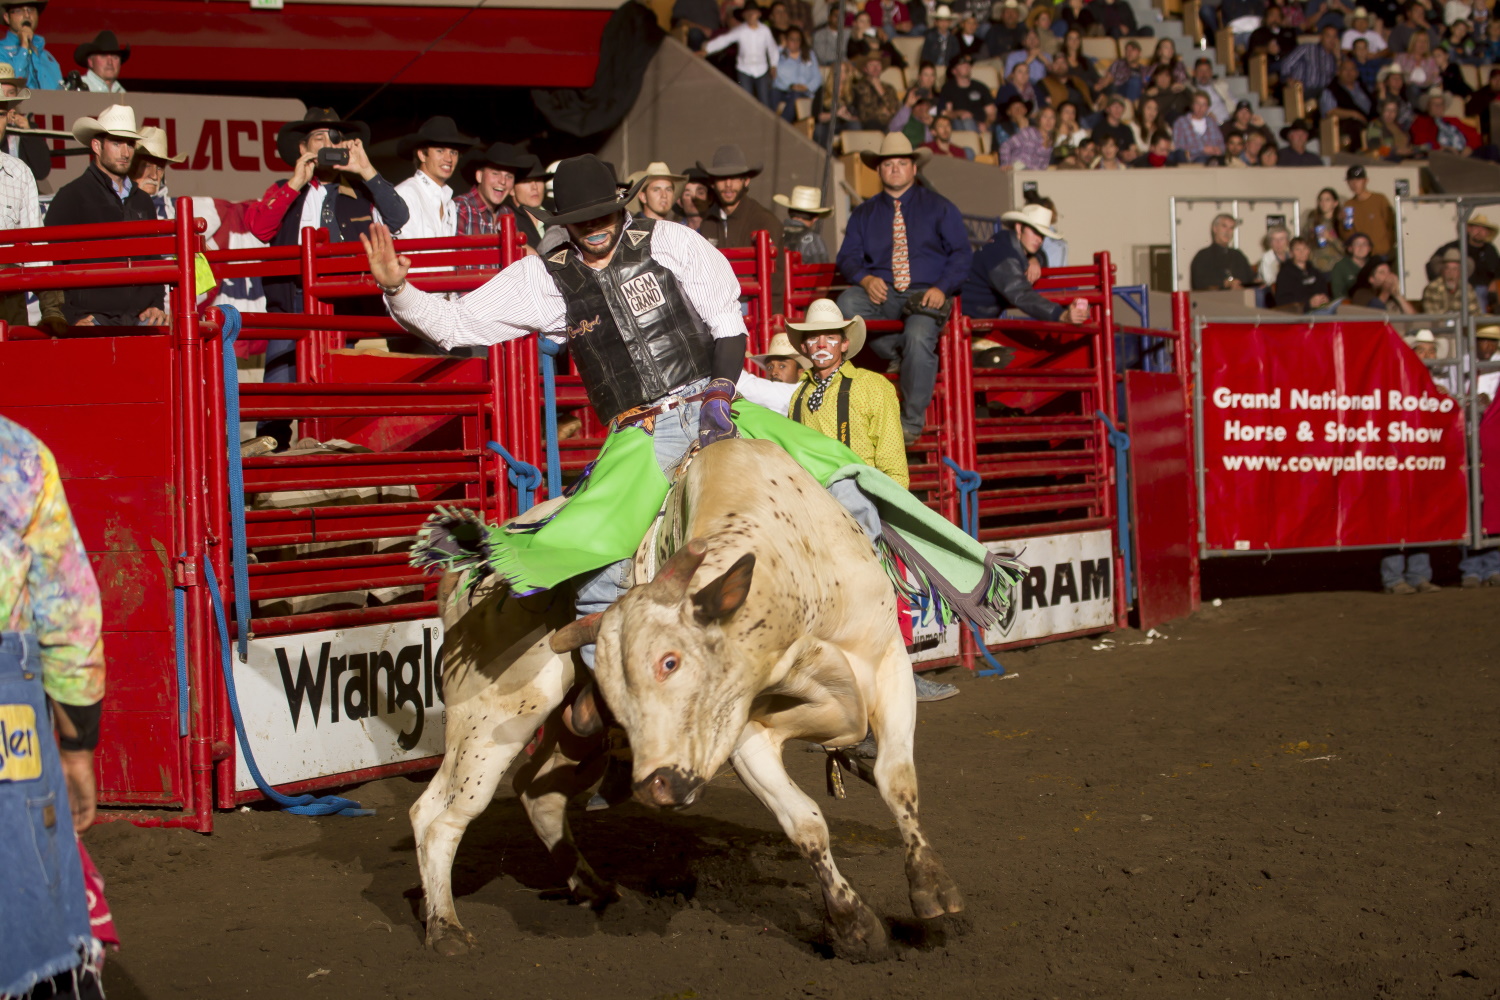 A rodeo bull rider in action, wearing a vest and chaps, while a crowd watches from the stands.